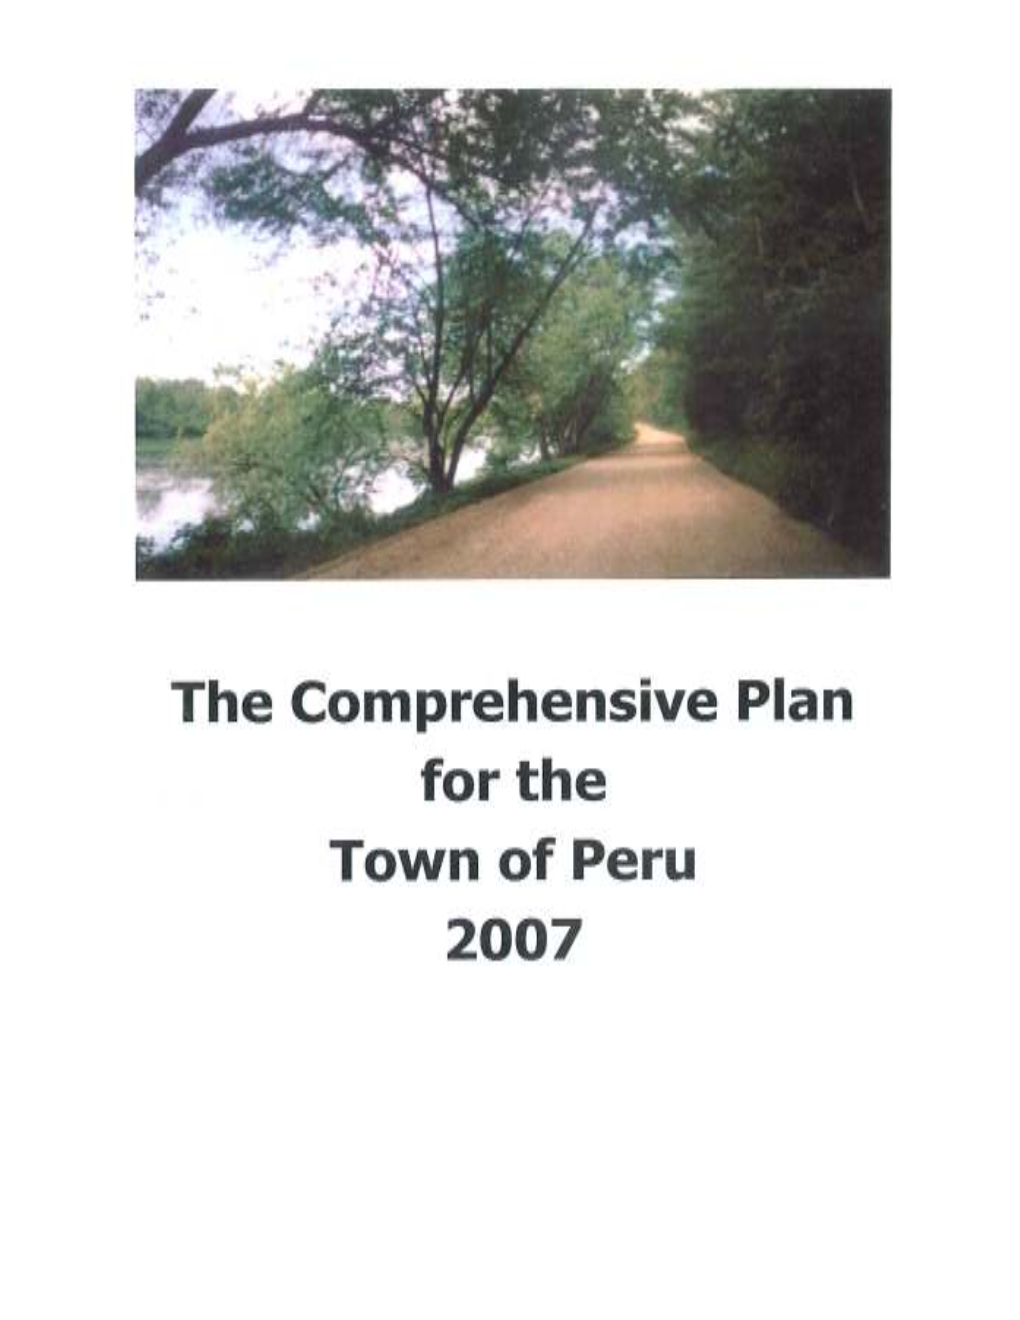 Town of Peru While Guiding Responsible Growth for the Benefit of Current and Future Citizens